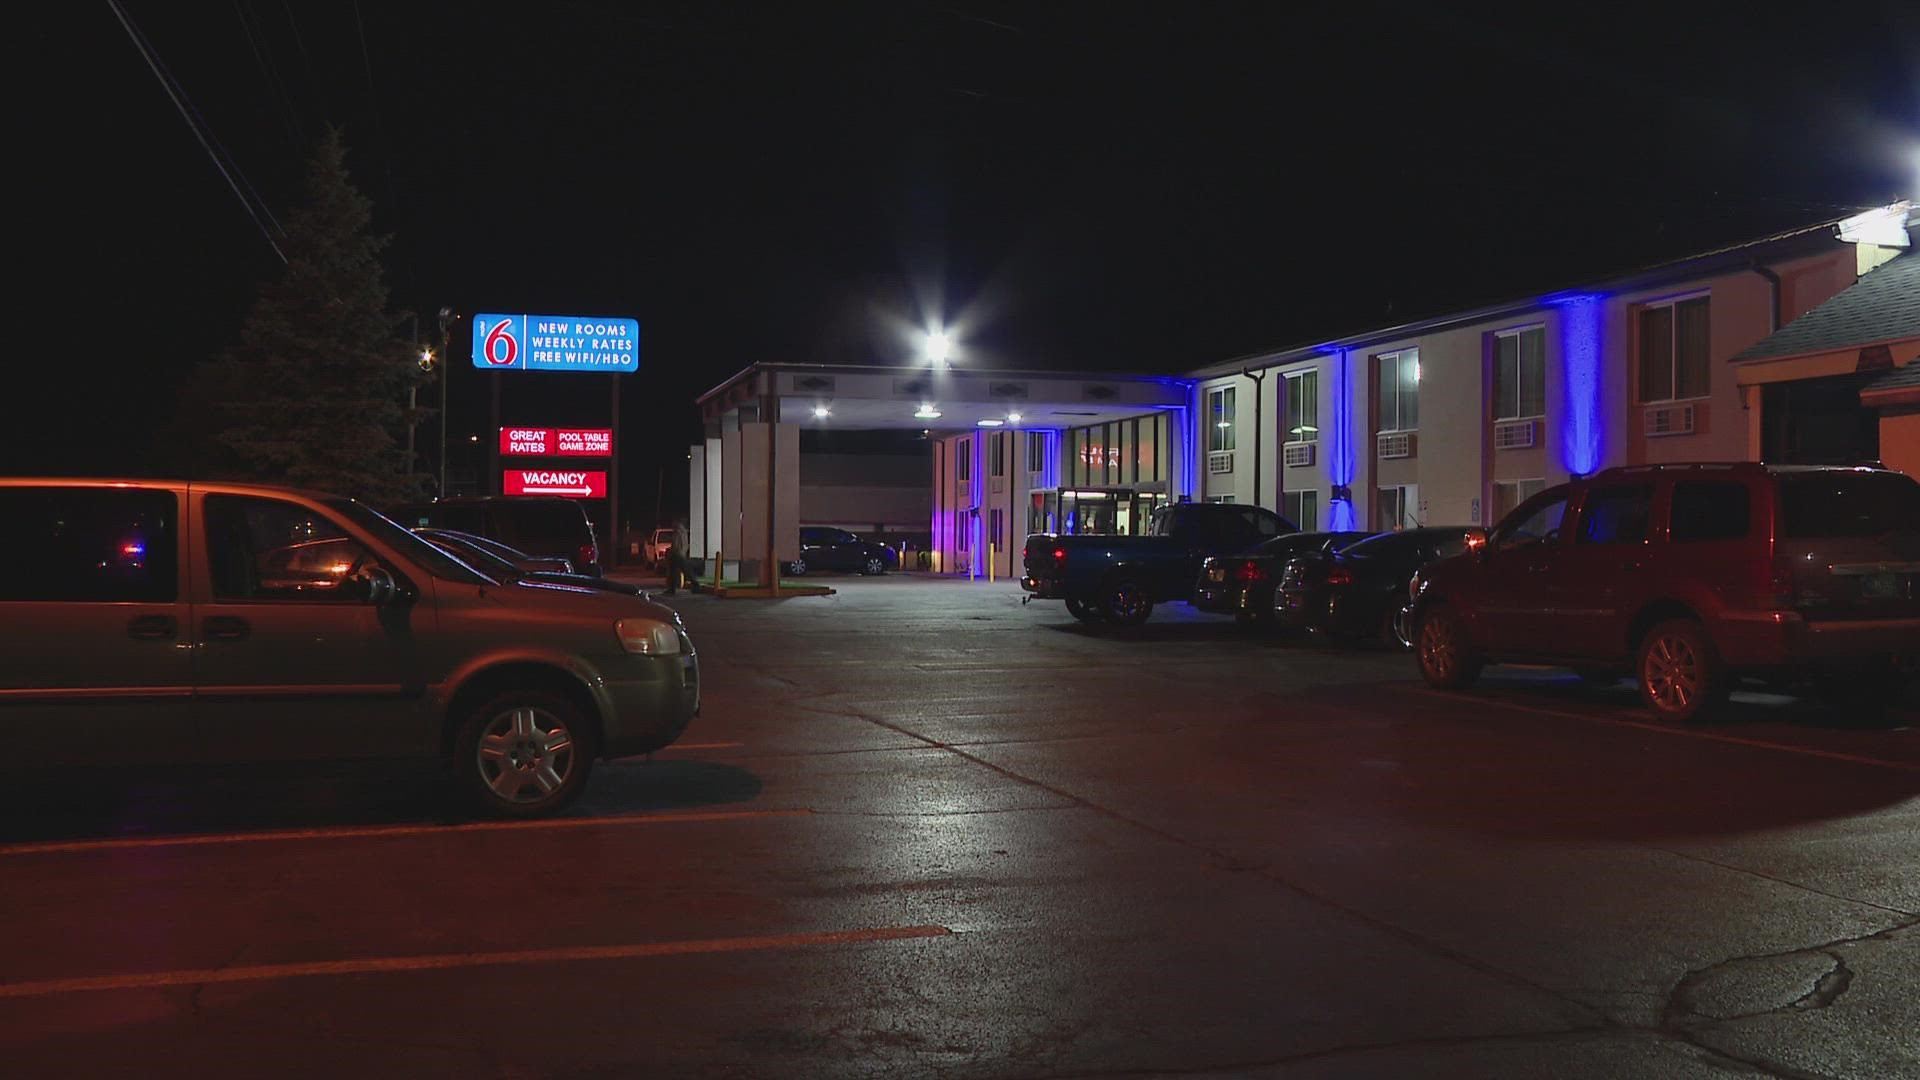 The person showed up at the Motel 6 Indianapolis located just north of the intersection of Shadeland Avenue and East 34th Street.